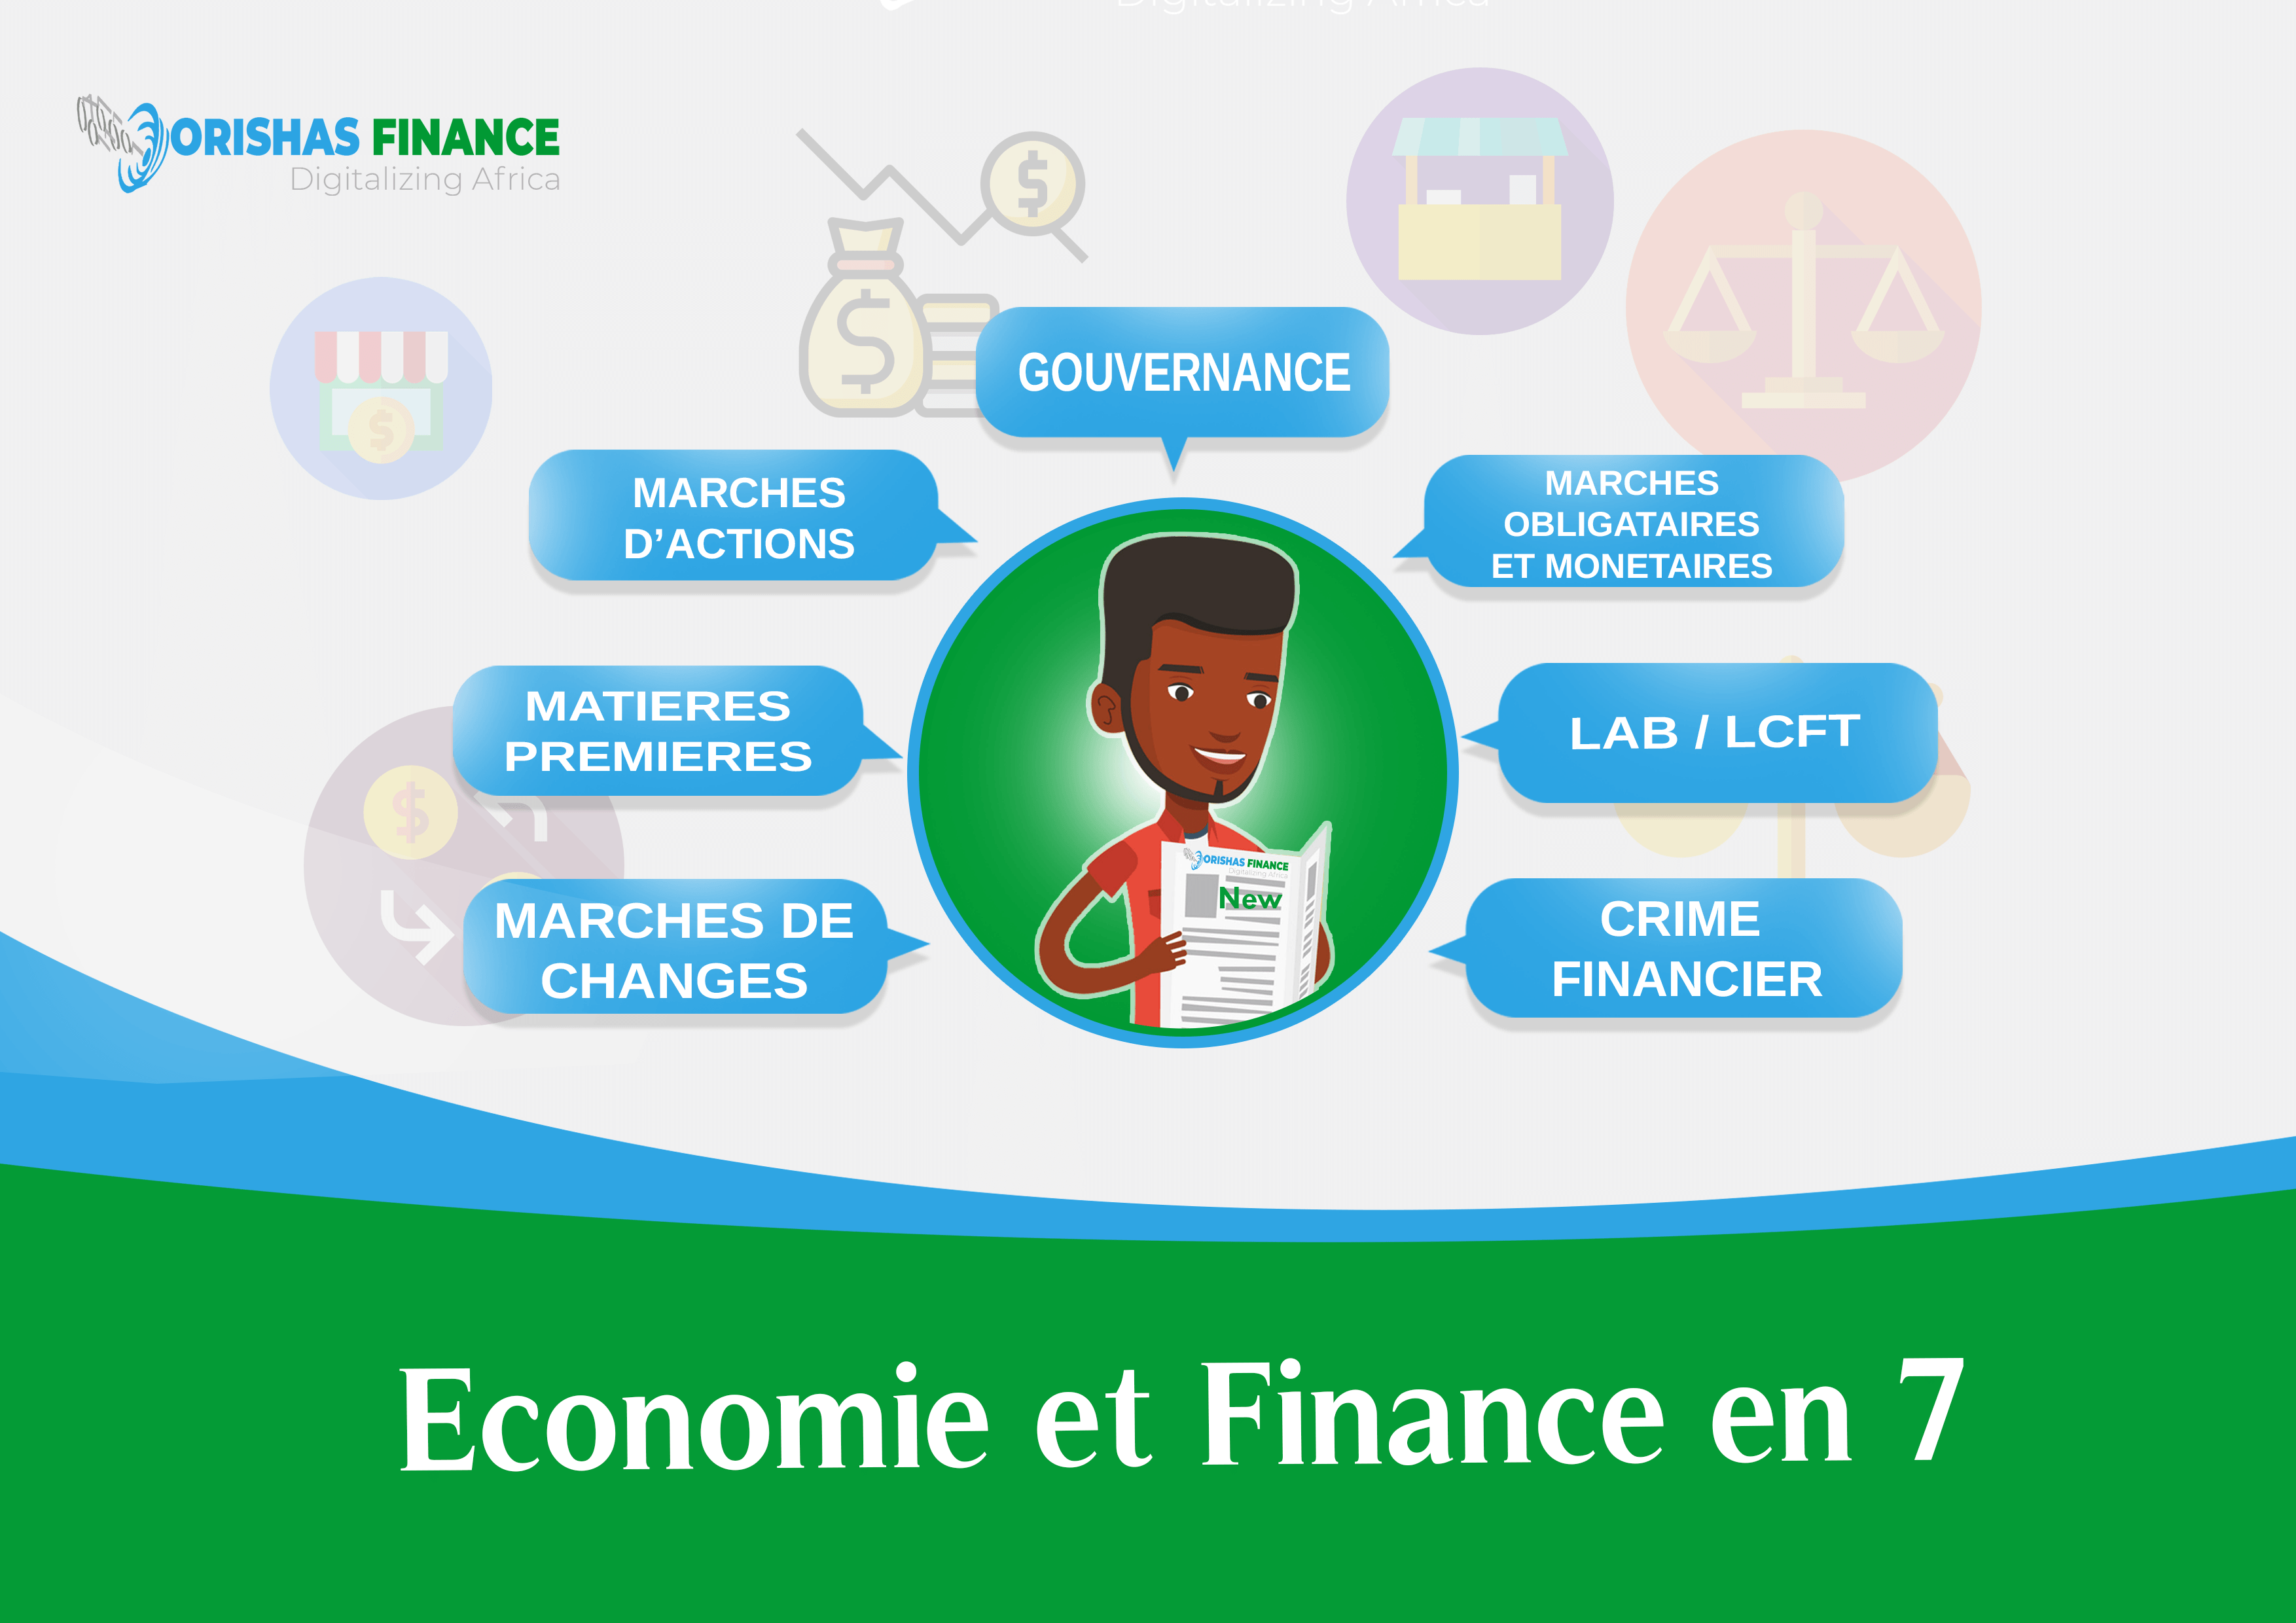  Economy and Finance in 7 from June 28 to July 02, 2021 